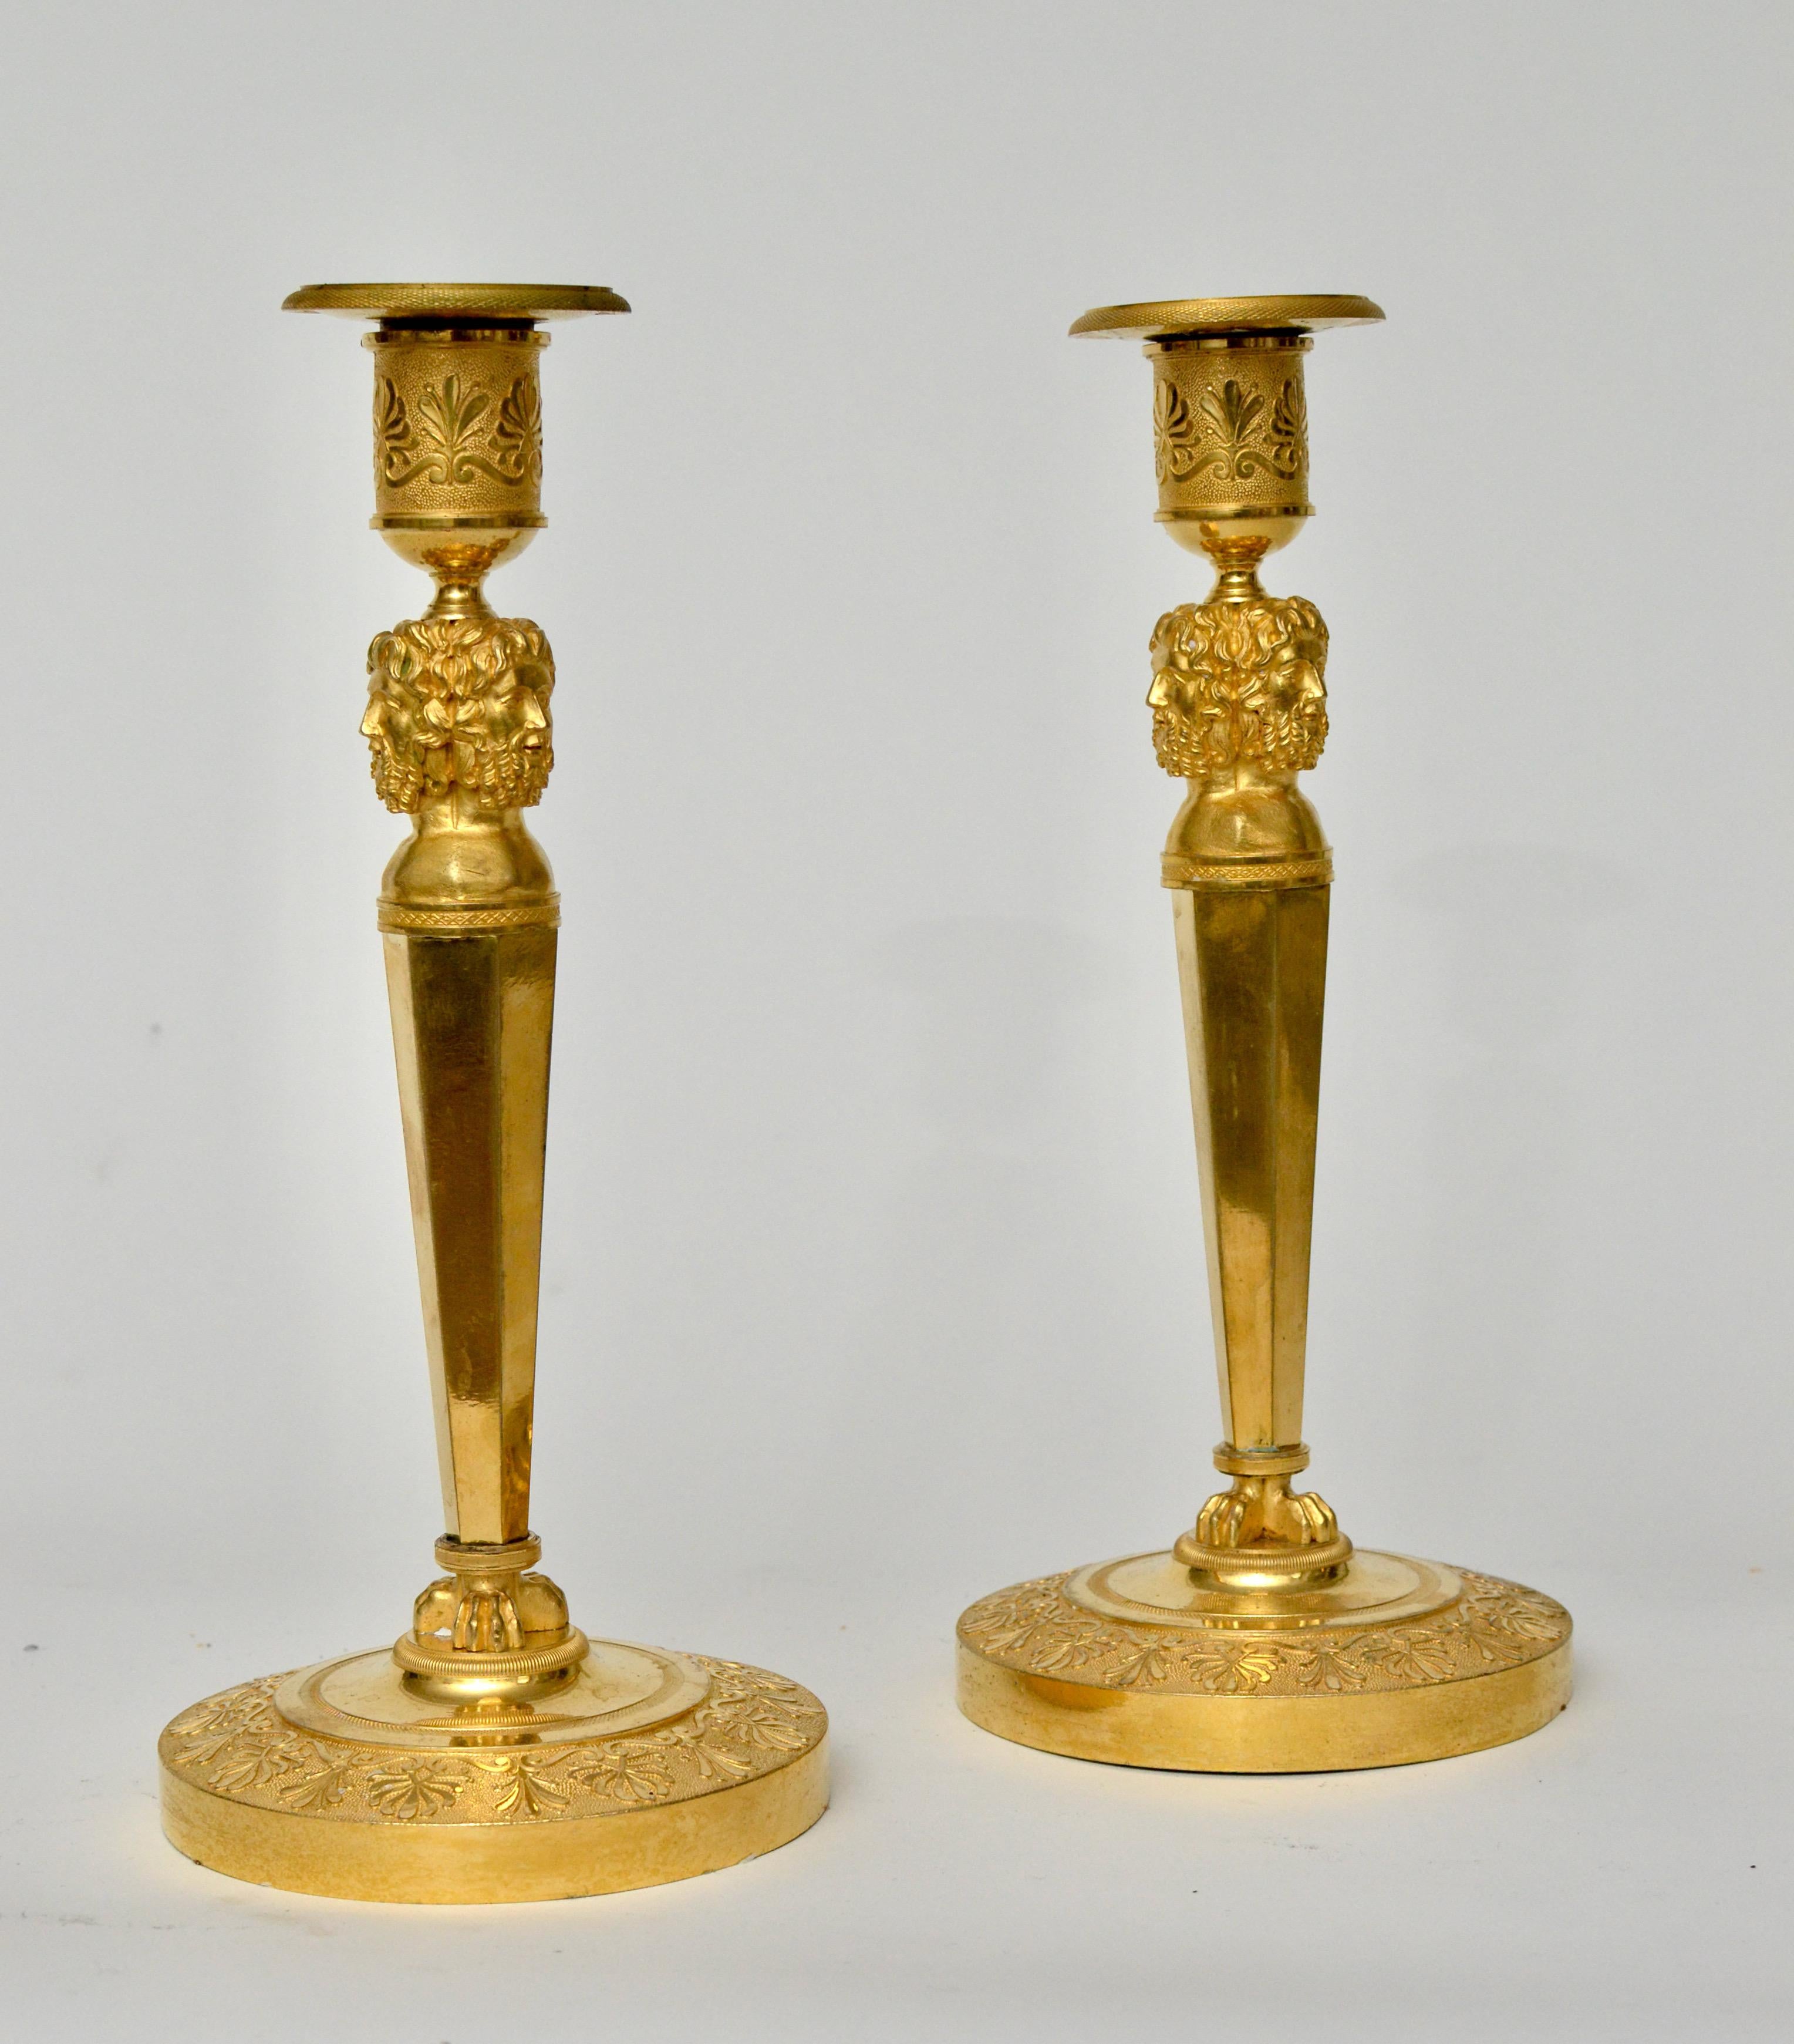 A very fine pair of French gilt bronze Empire candlesticks, Paris circa 1805-1810. The three figural heads on each candlestick is probably that of Homer.
Homer is the presumed author of the Iliad and the Odyssey, two epic poems that are the